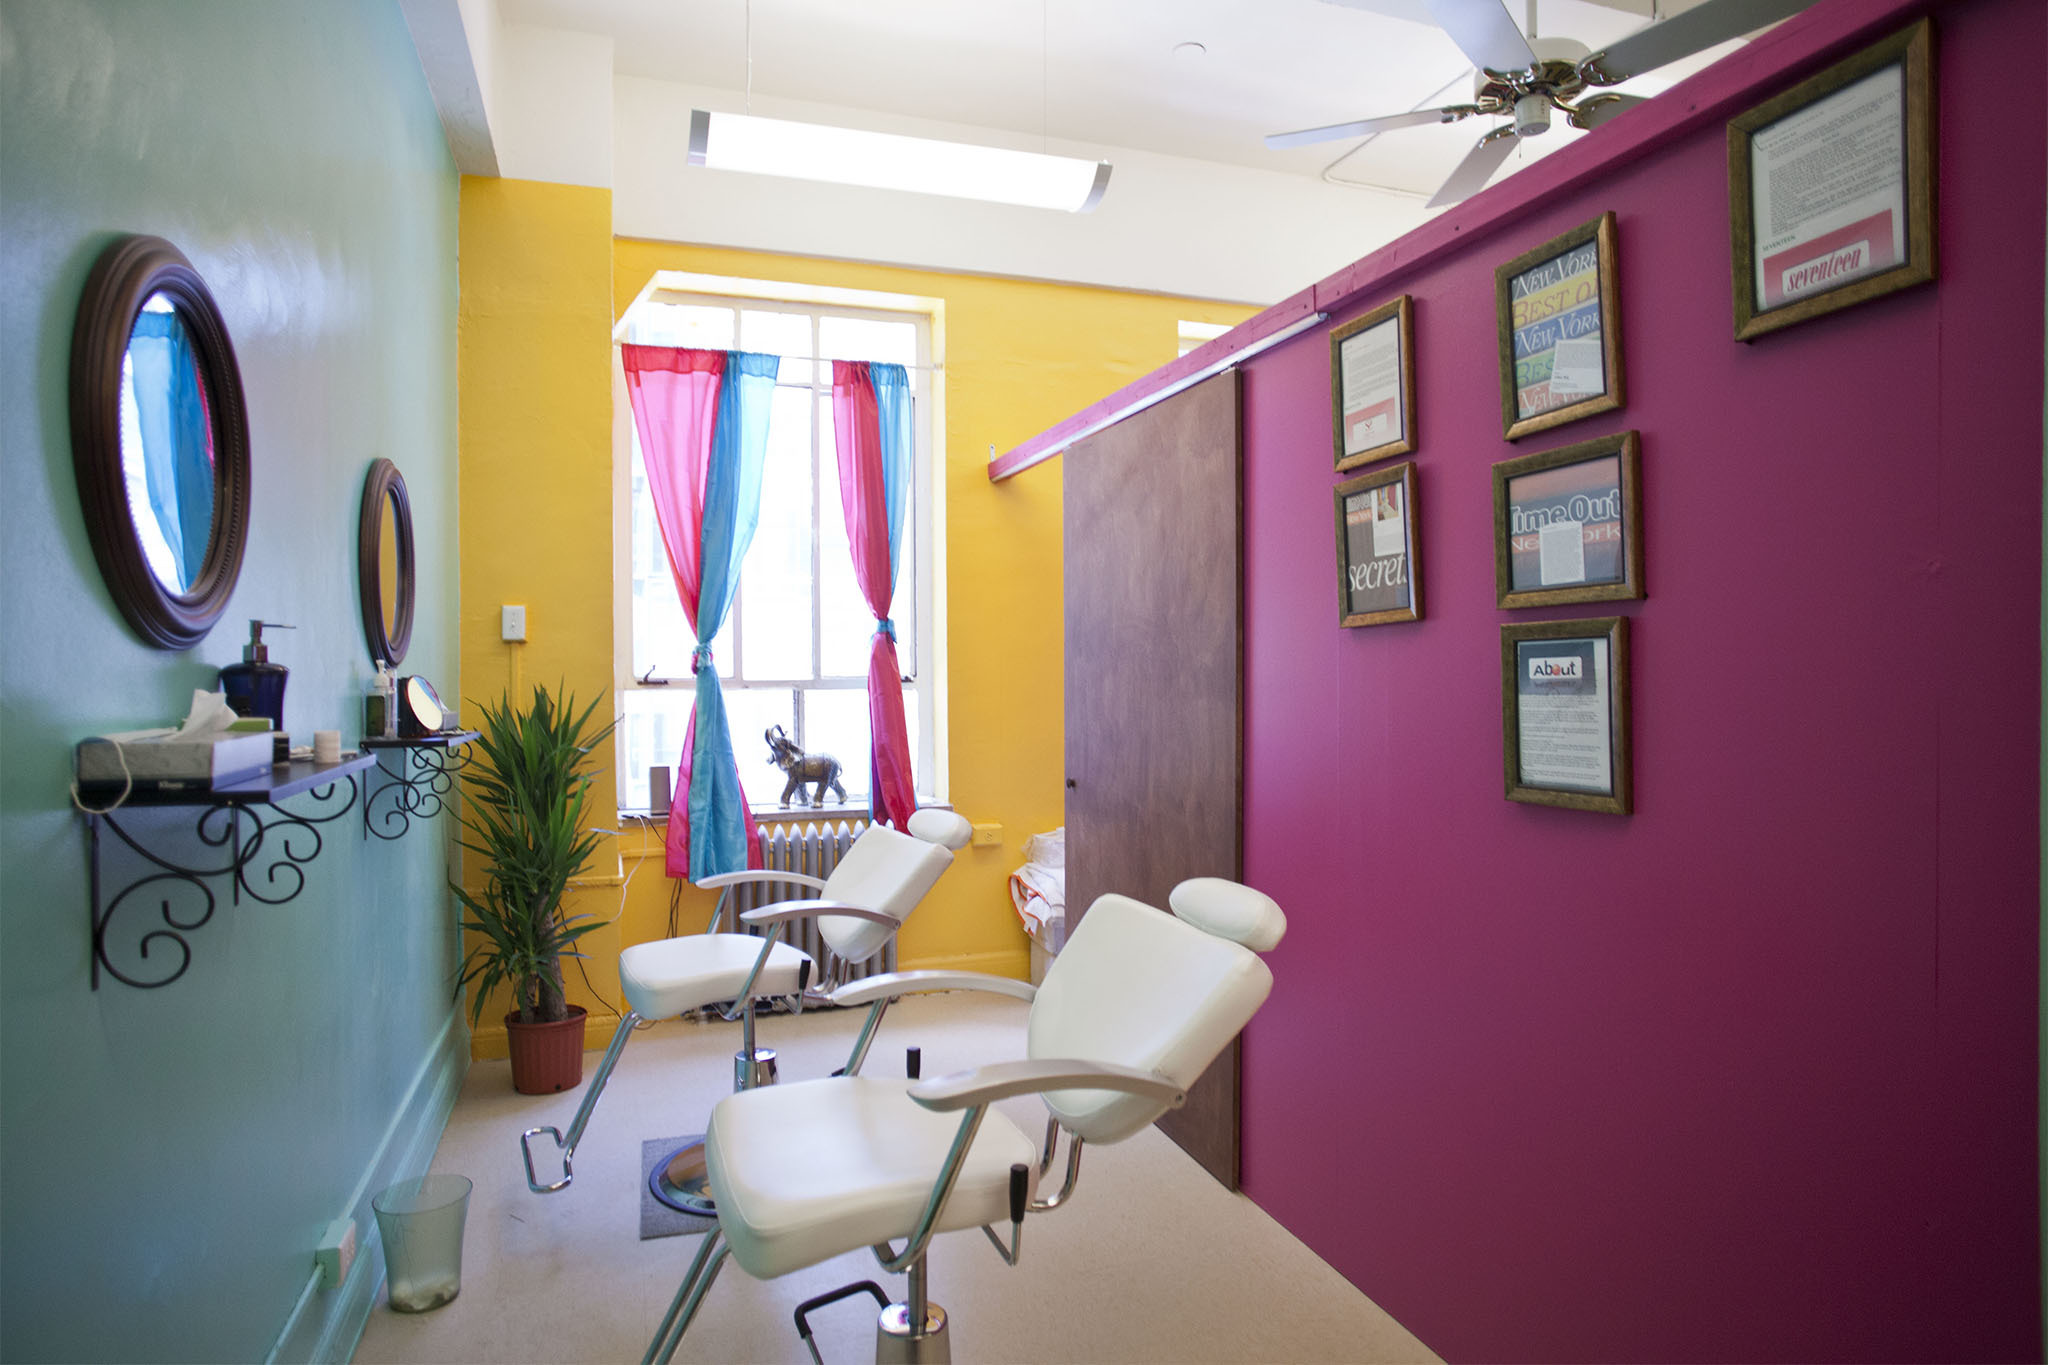 Find a waxing salon in NYC for affordable and painless ...